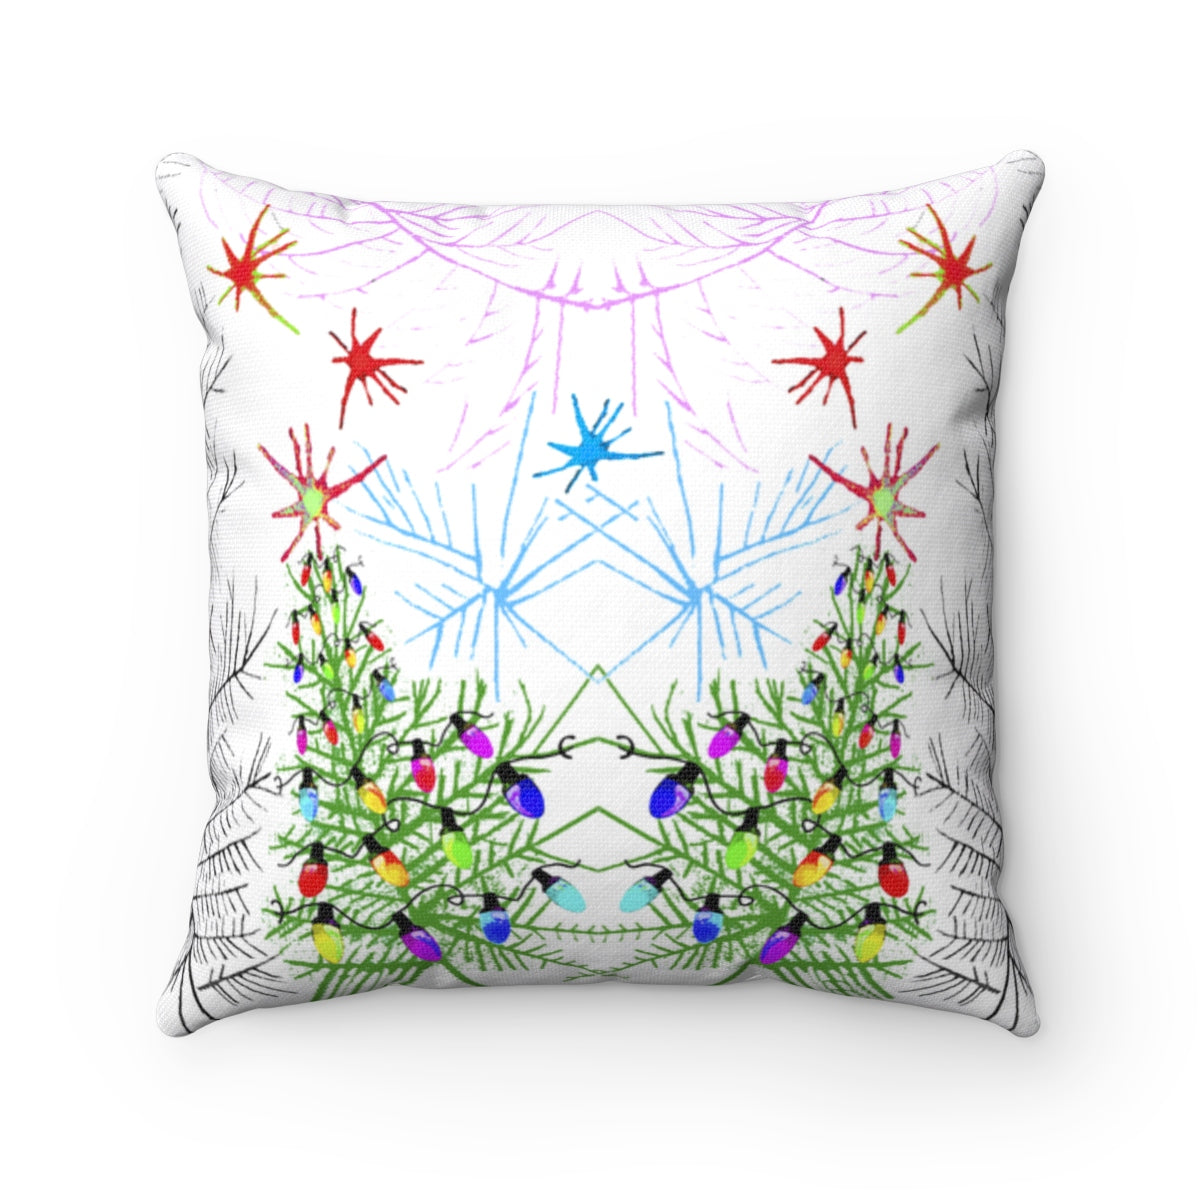 Branches & Stars Square Pillow